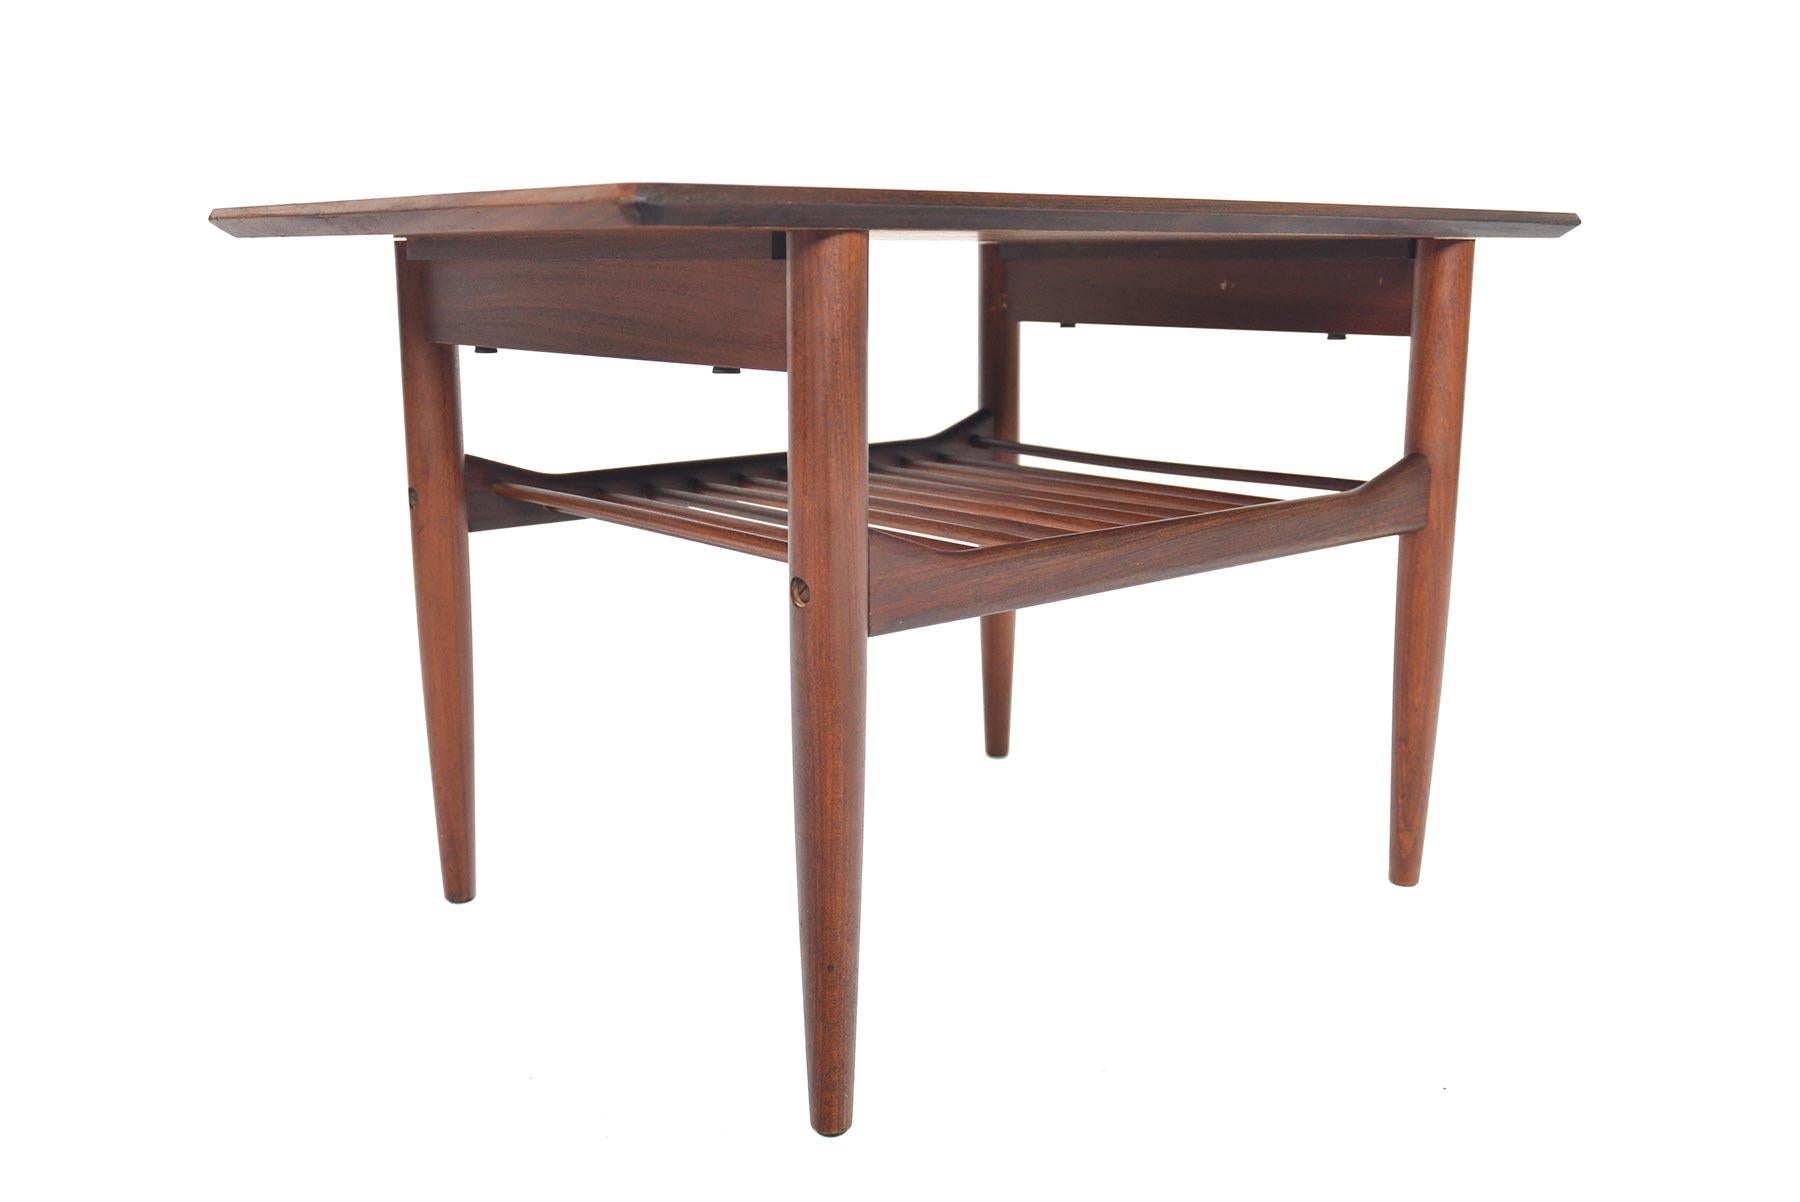 Designed by Ib Kofod- Larsen for G Plan’s Danish range in the 1960s, perfectly detailed side table is crafted in old- growth teak. A lower doweled rack provides storage. In excellent original condition.
  